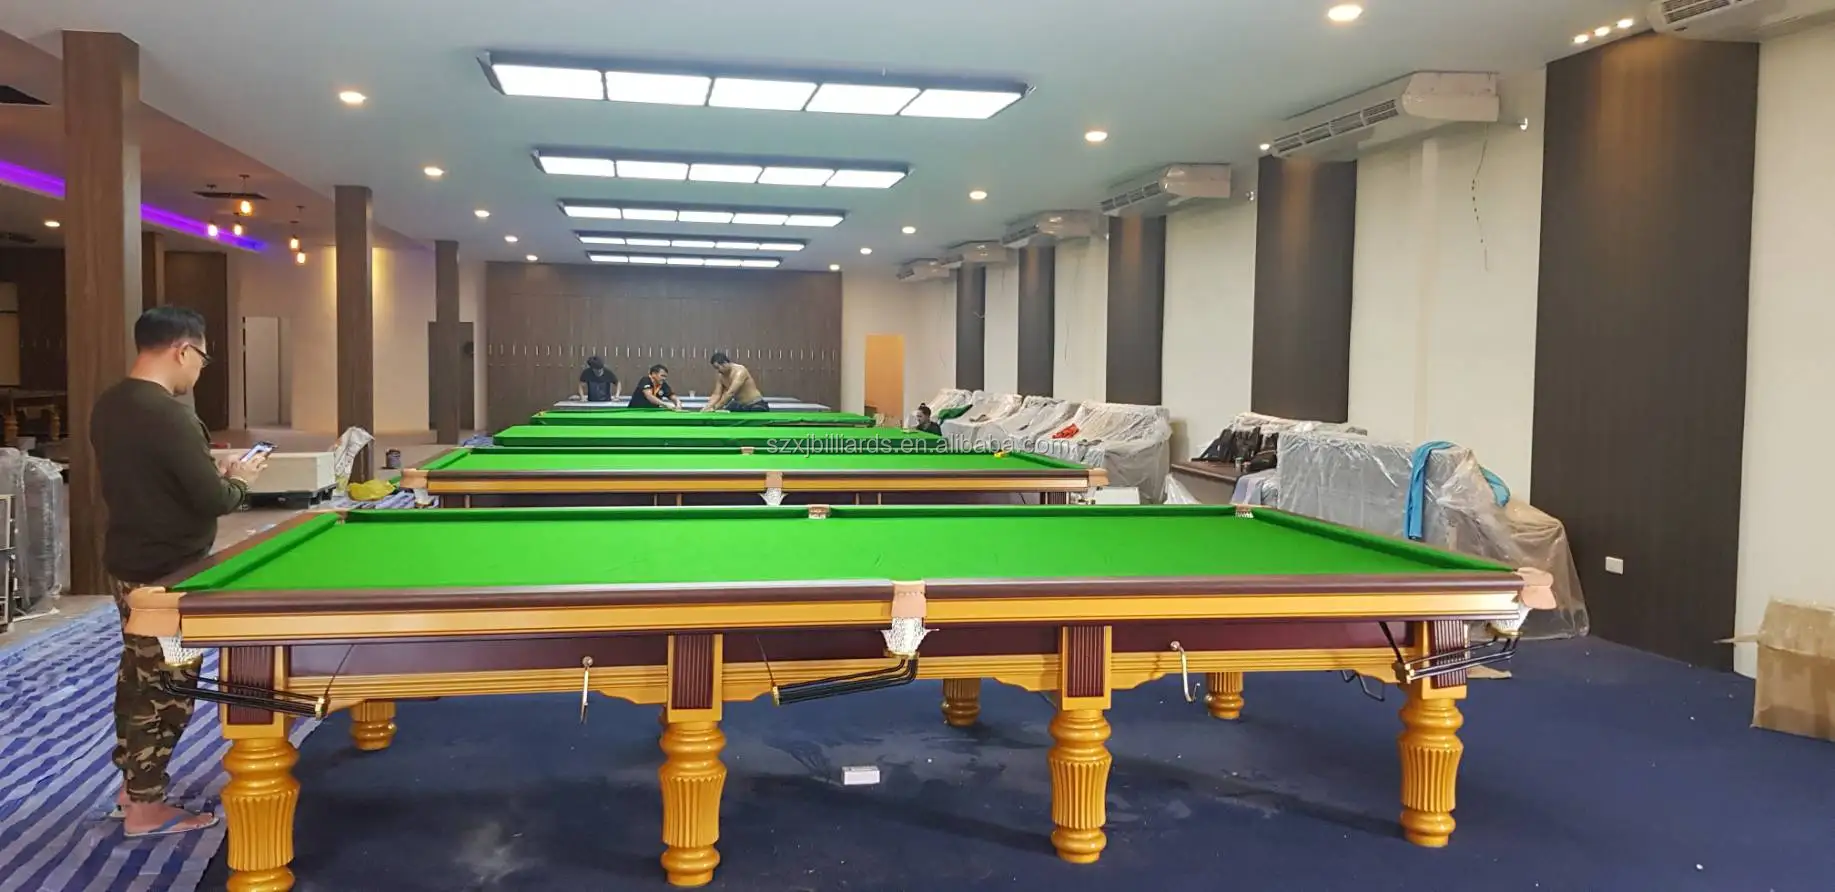 Xingjue Factory 12ft Professional Snooker Pool Table ...